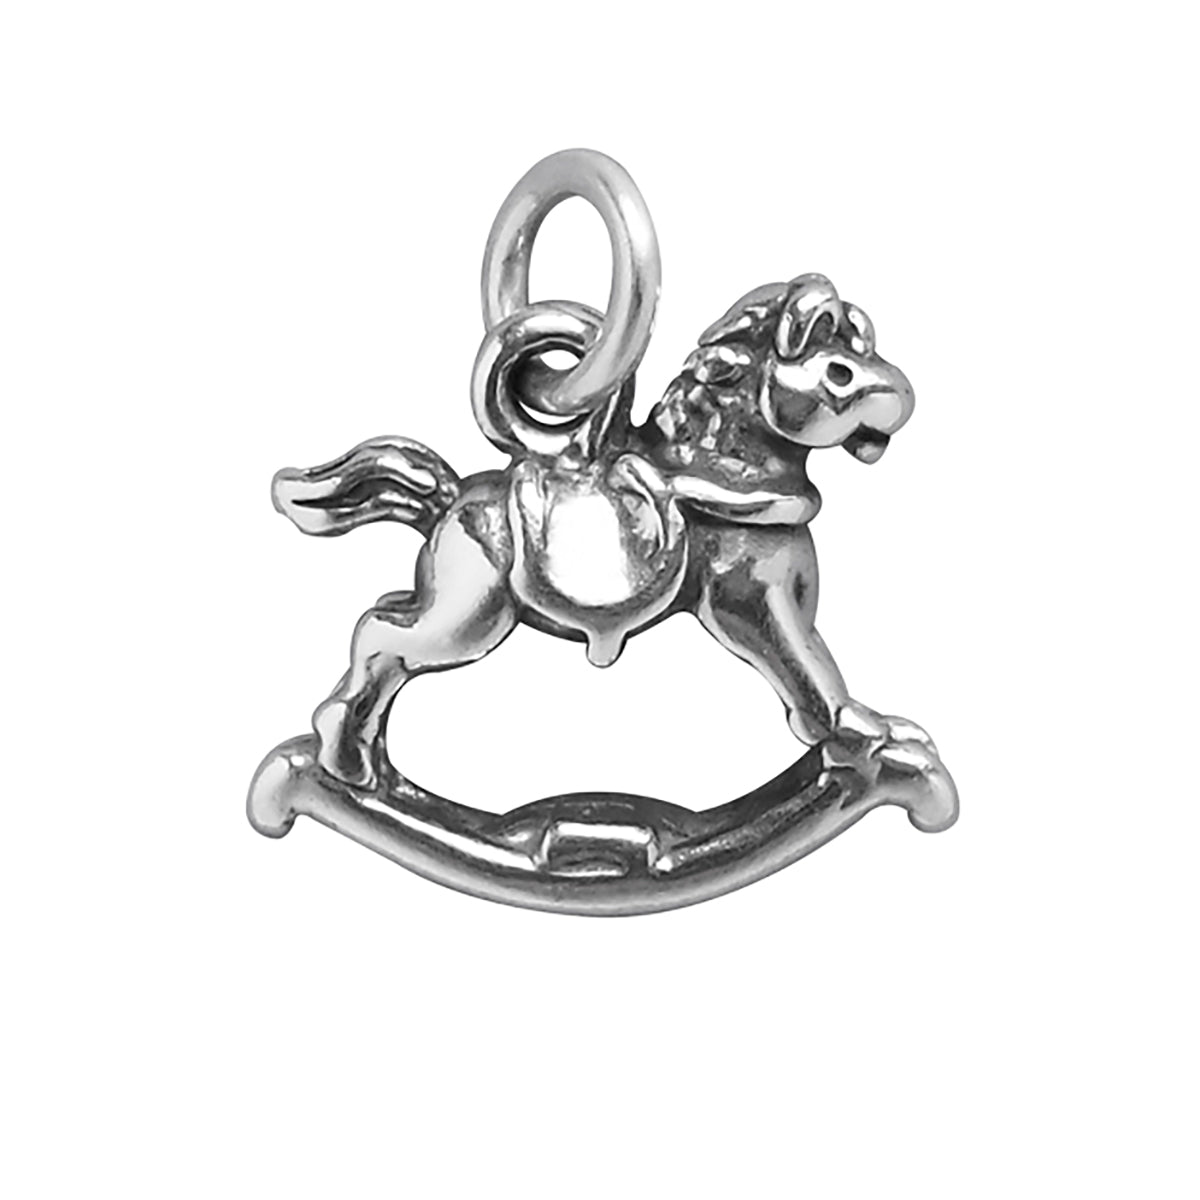 Sterling silver rocking horse charm